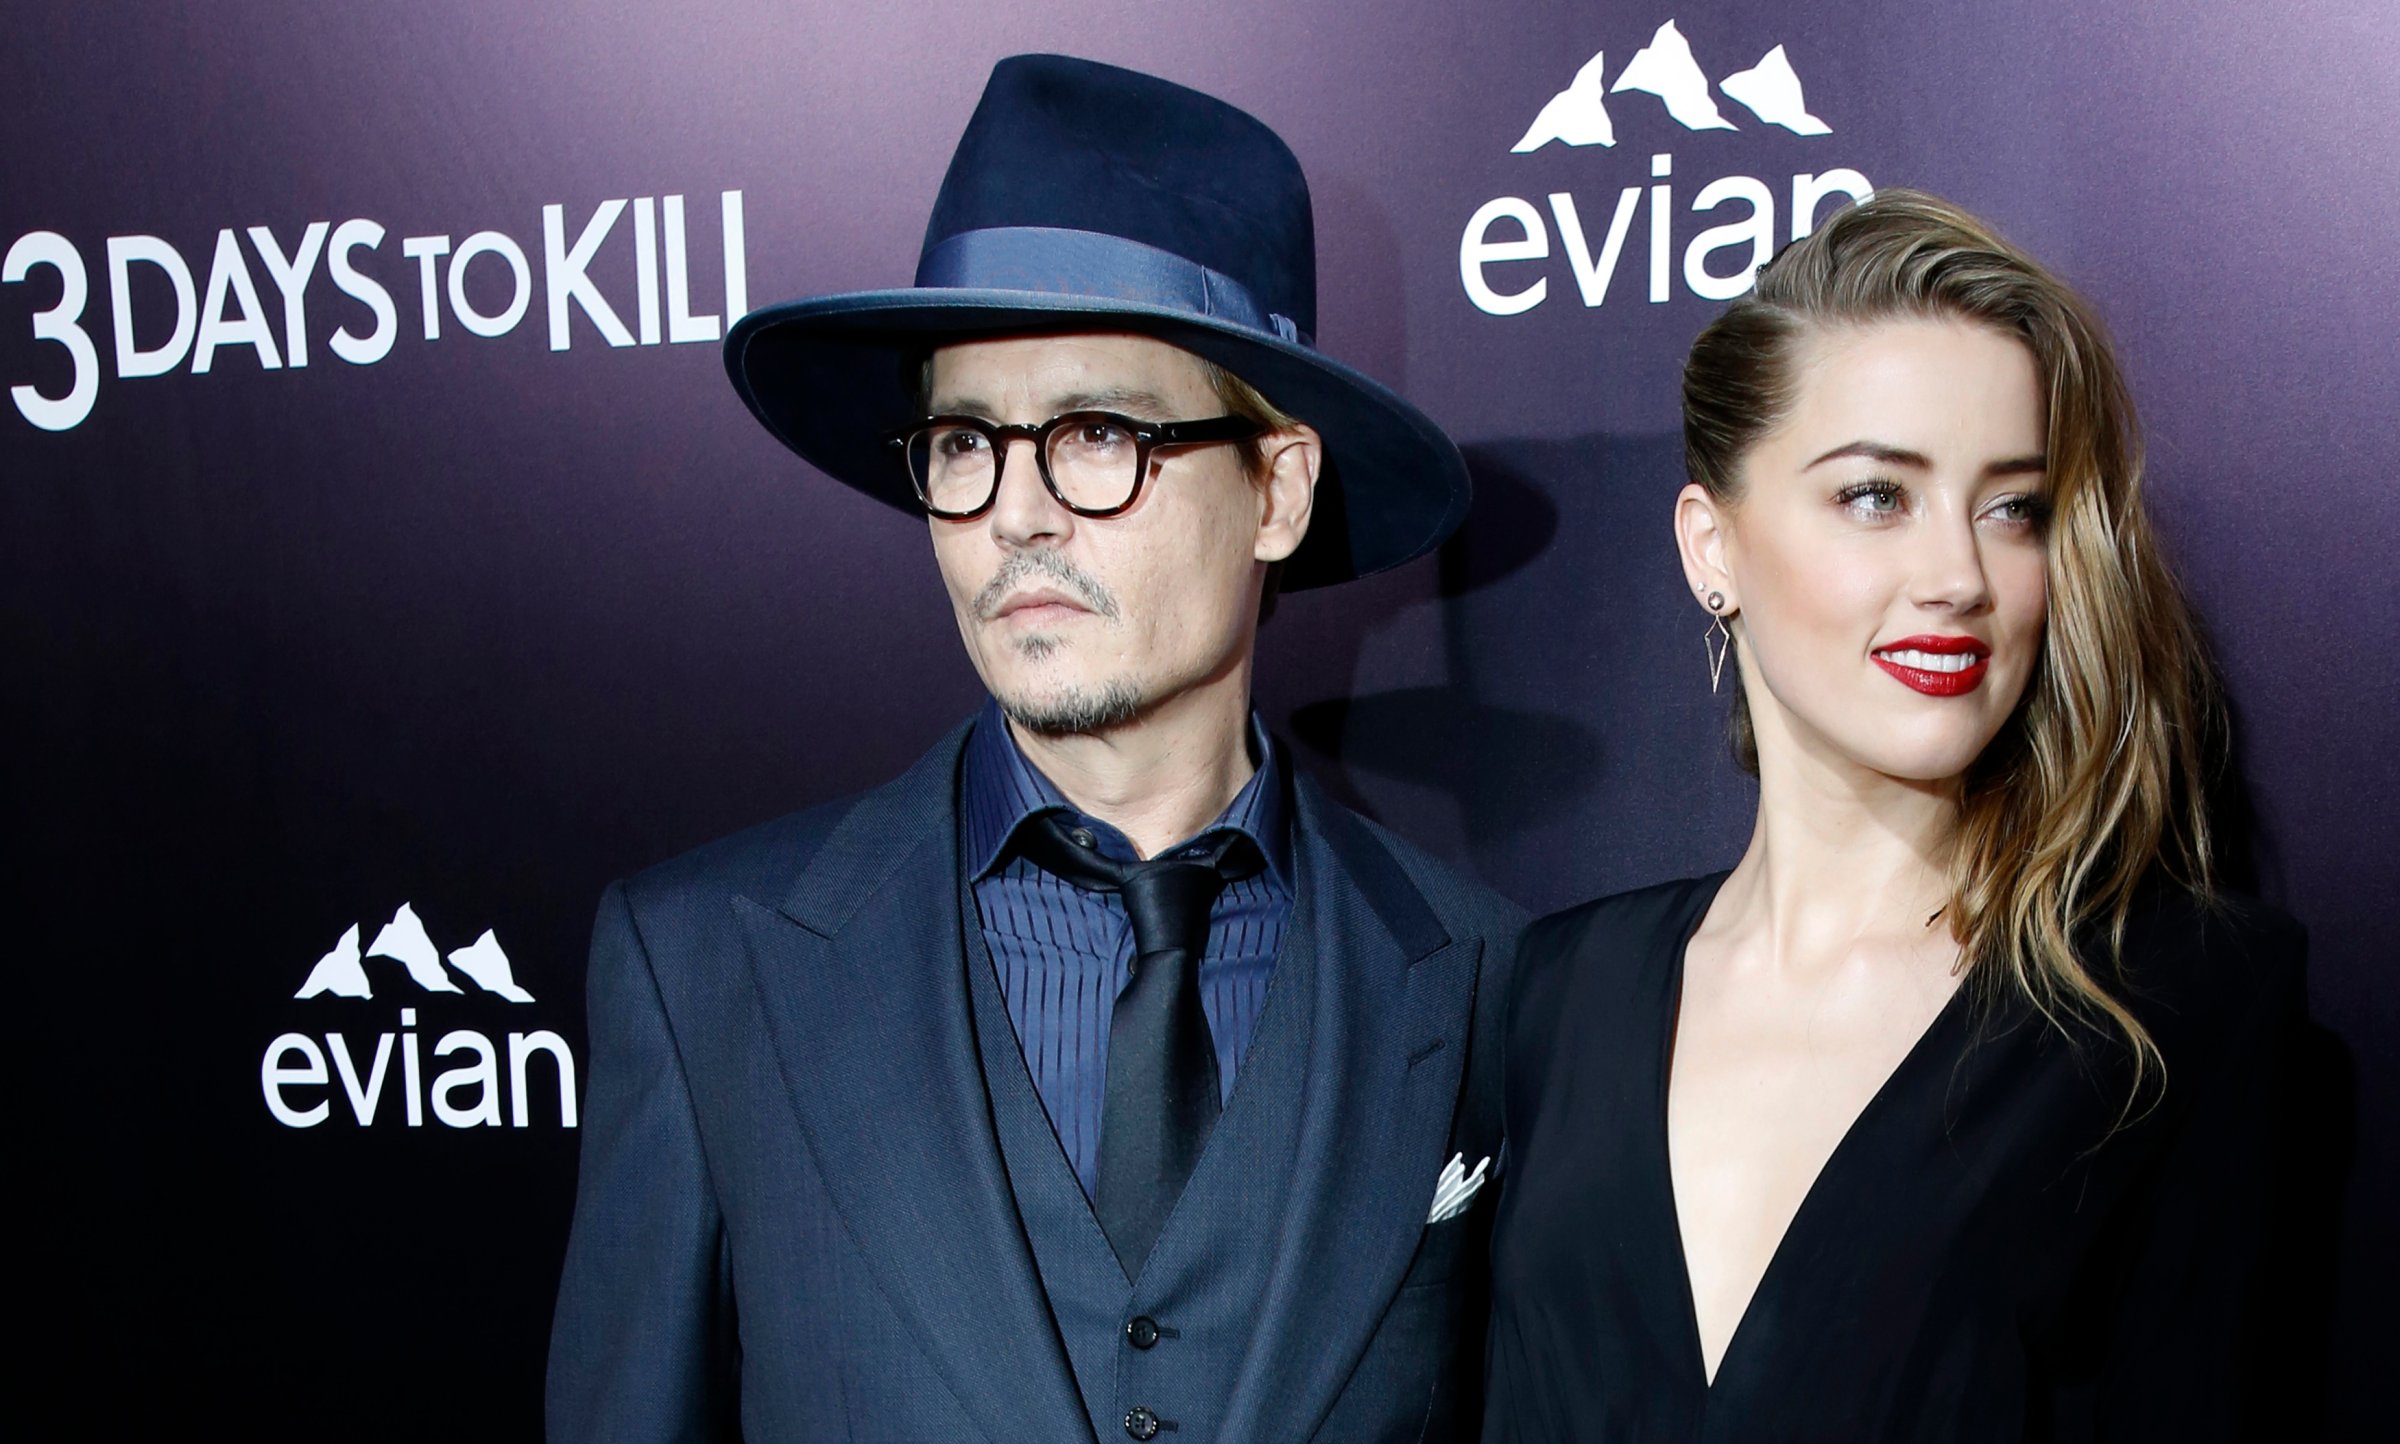 Cast member Amber Heard and her fiance, actor Johnny Depp pose at the premiere of "3 Days to Kill" in Los Angeles